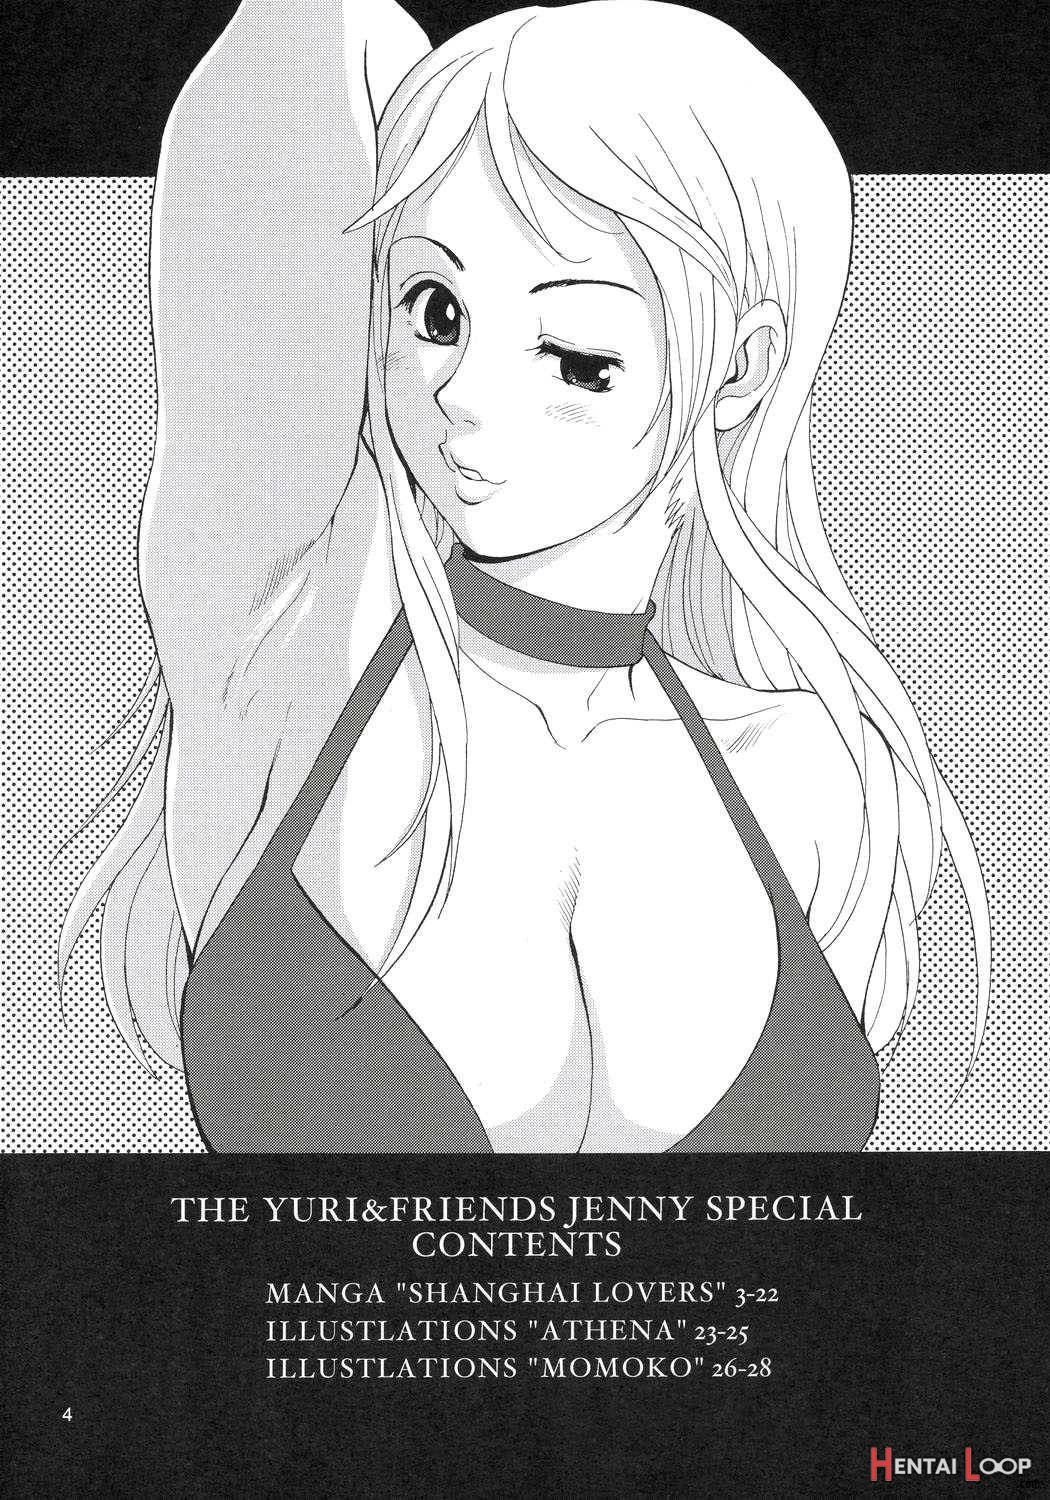 The Yuri&friends – Jenny Special page 3